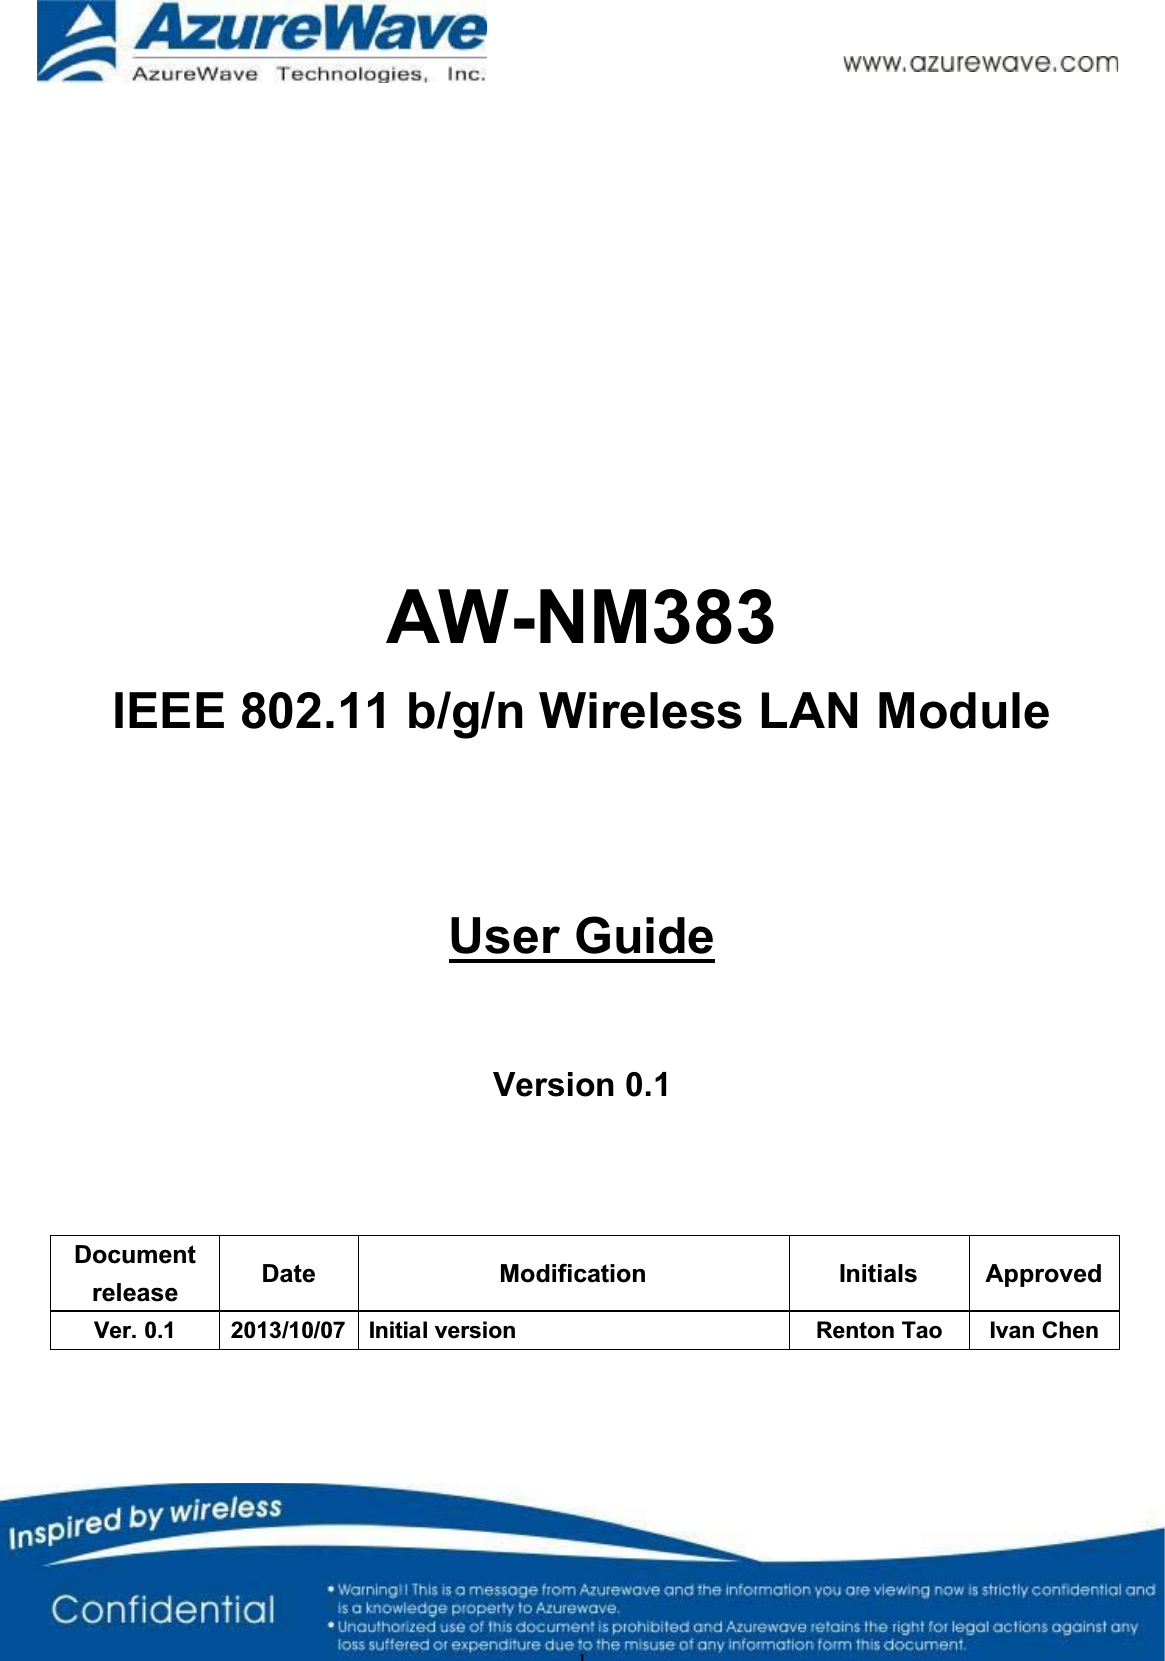 1AW-NM383IEEE 802.11 b/g/n Wireless LAN ModuleUser GuideVersion 0.1 Documentrelease  Date Modification  Initials Approved Ver. 0.1  2013/10/07  Initial version  Renton Tao  Ivan Chen 